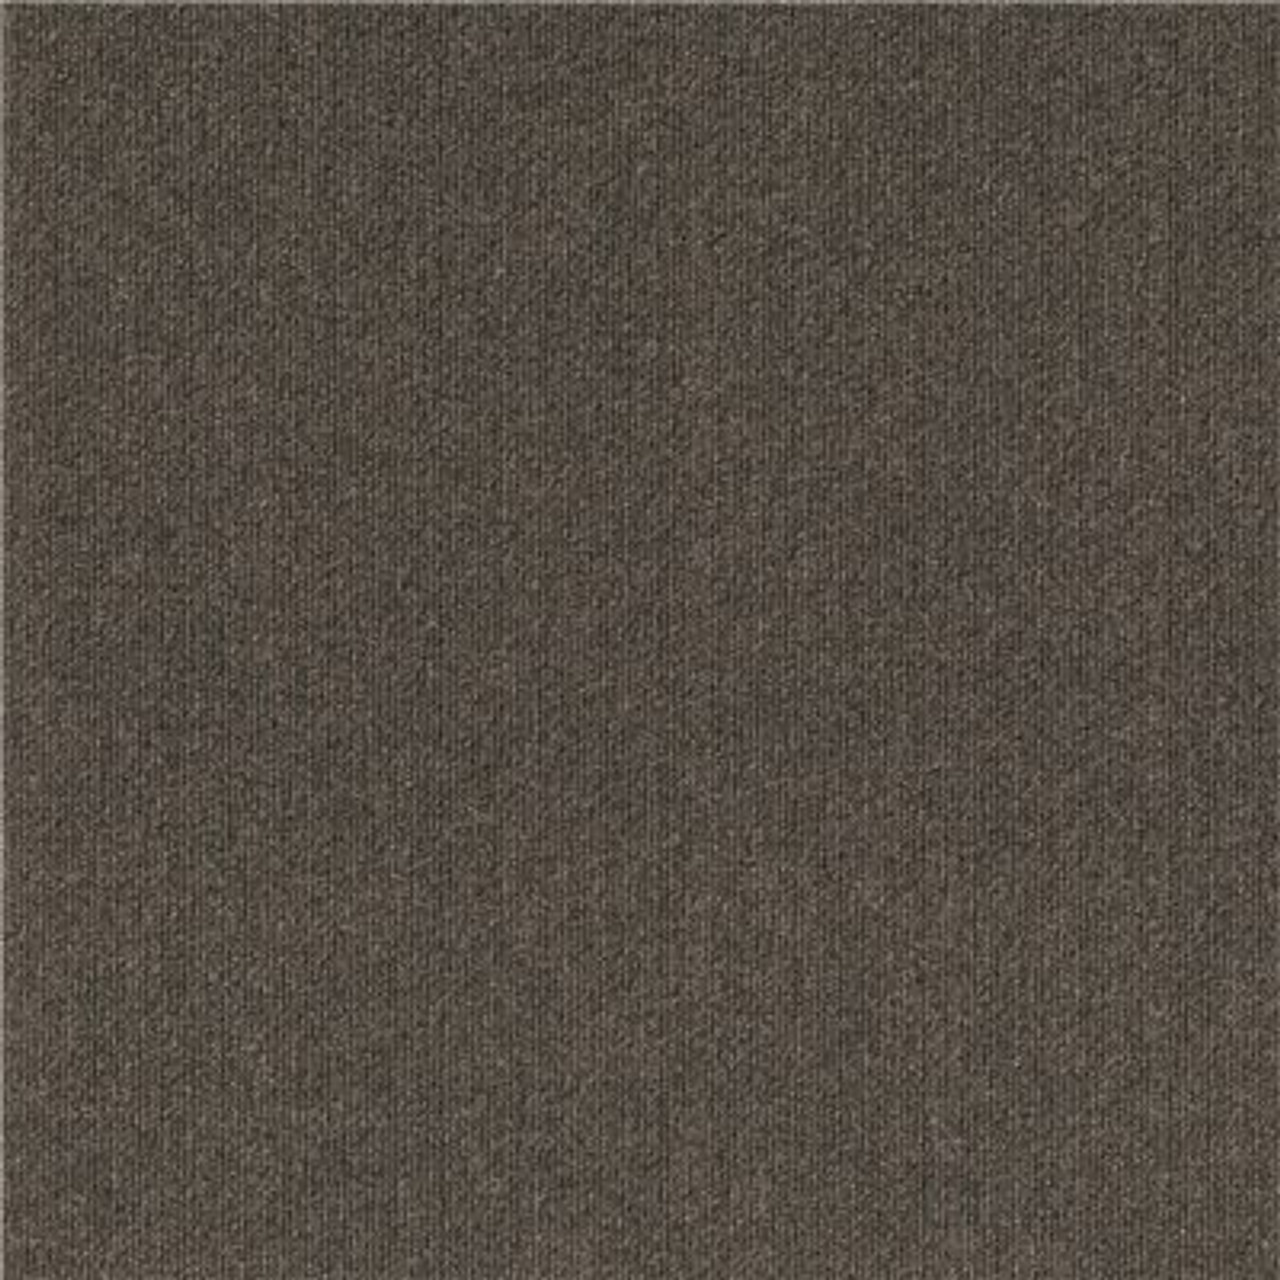 Foss Peel And Stick First Impressions Black Ice Ribbed Texture 24 In. X 24 In. Commercial Carpet Tile (15 Tiles/Case)